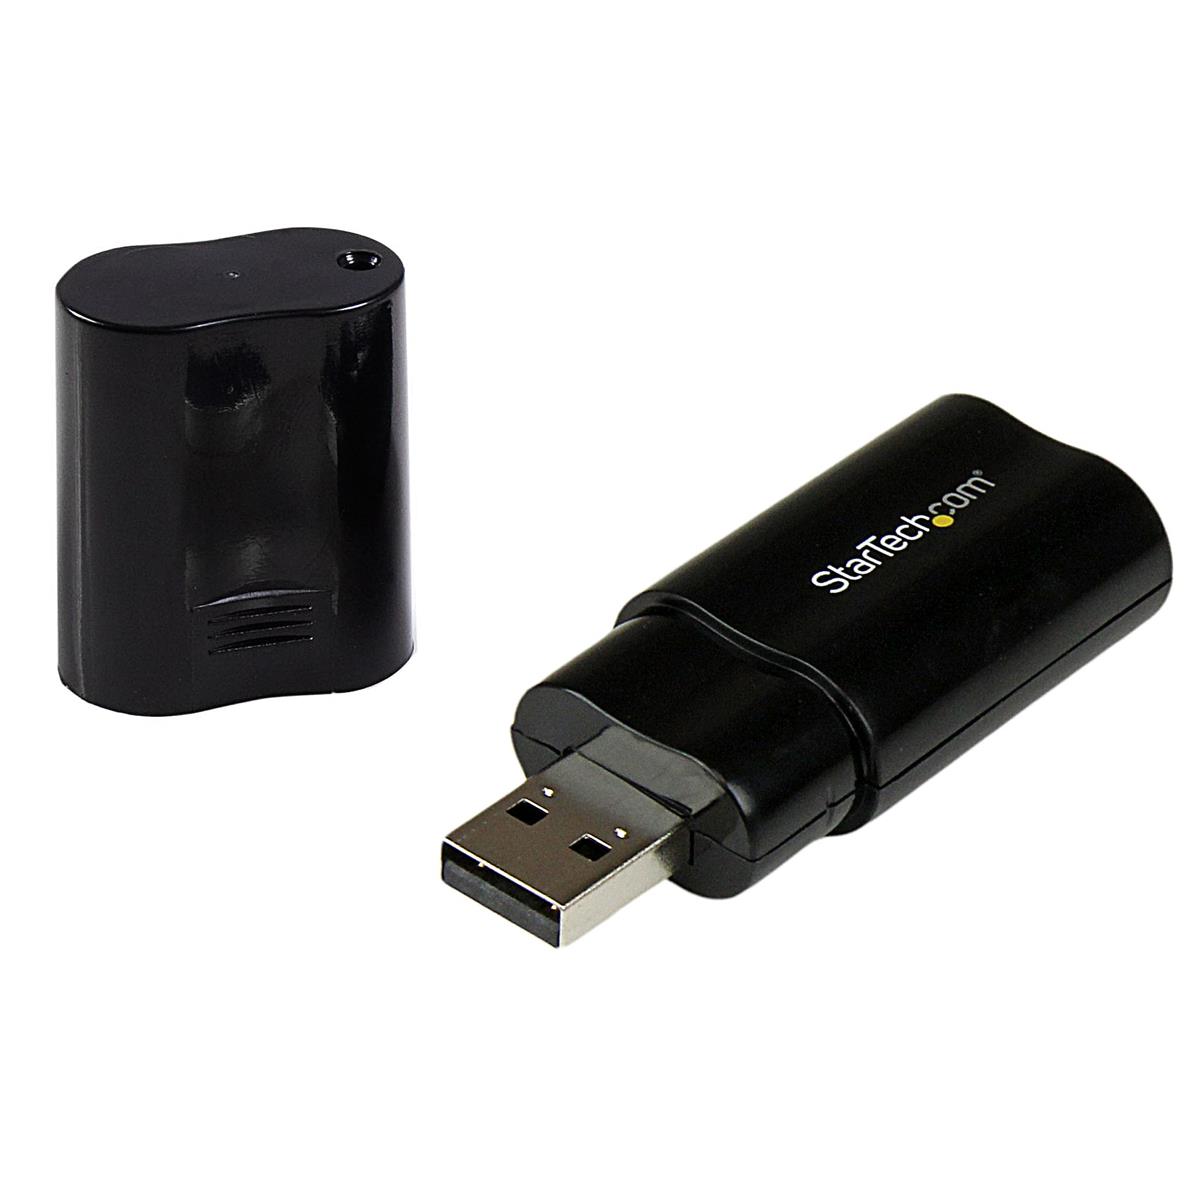 Image of StarTech USB to Stereo Audio Adapter Converter